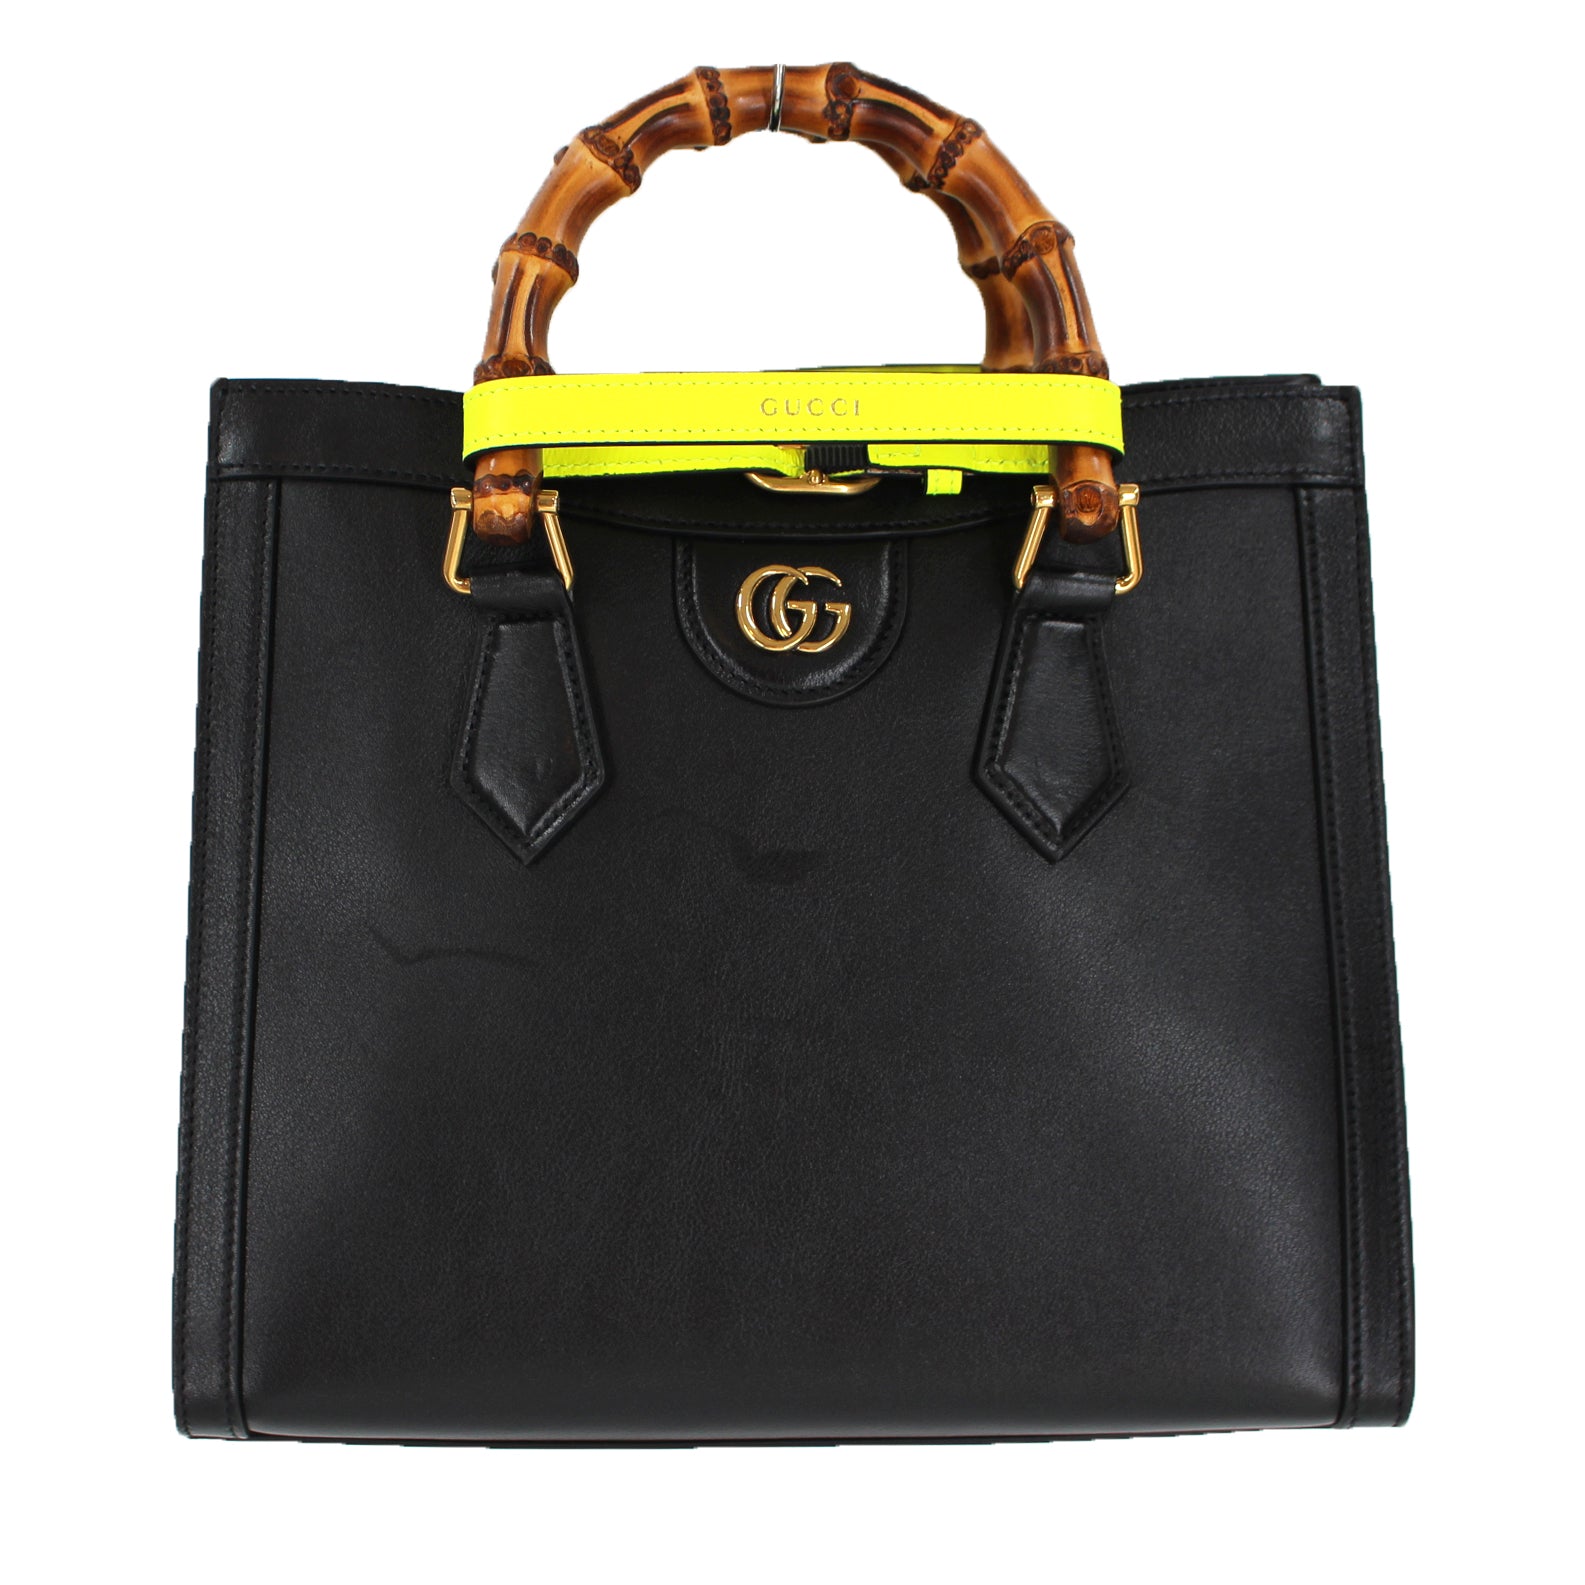 Authenticated Used GUCCI Gucci Handbag 189869 Bamboo Leather Black Women's  Dark Green Made in Italy Gold Metal Fittings 